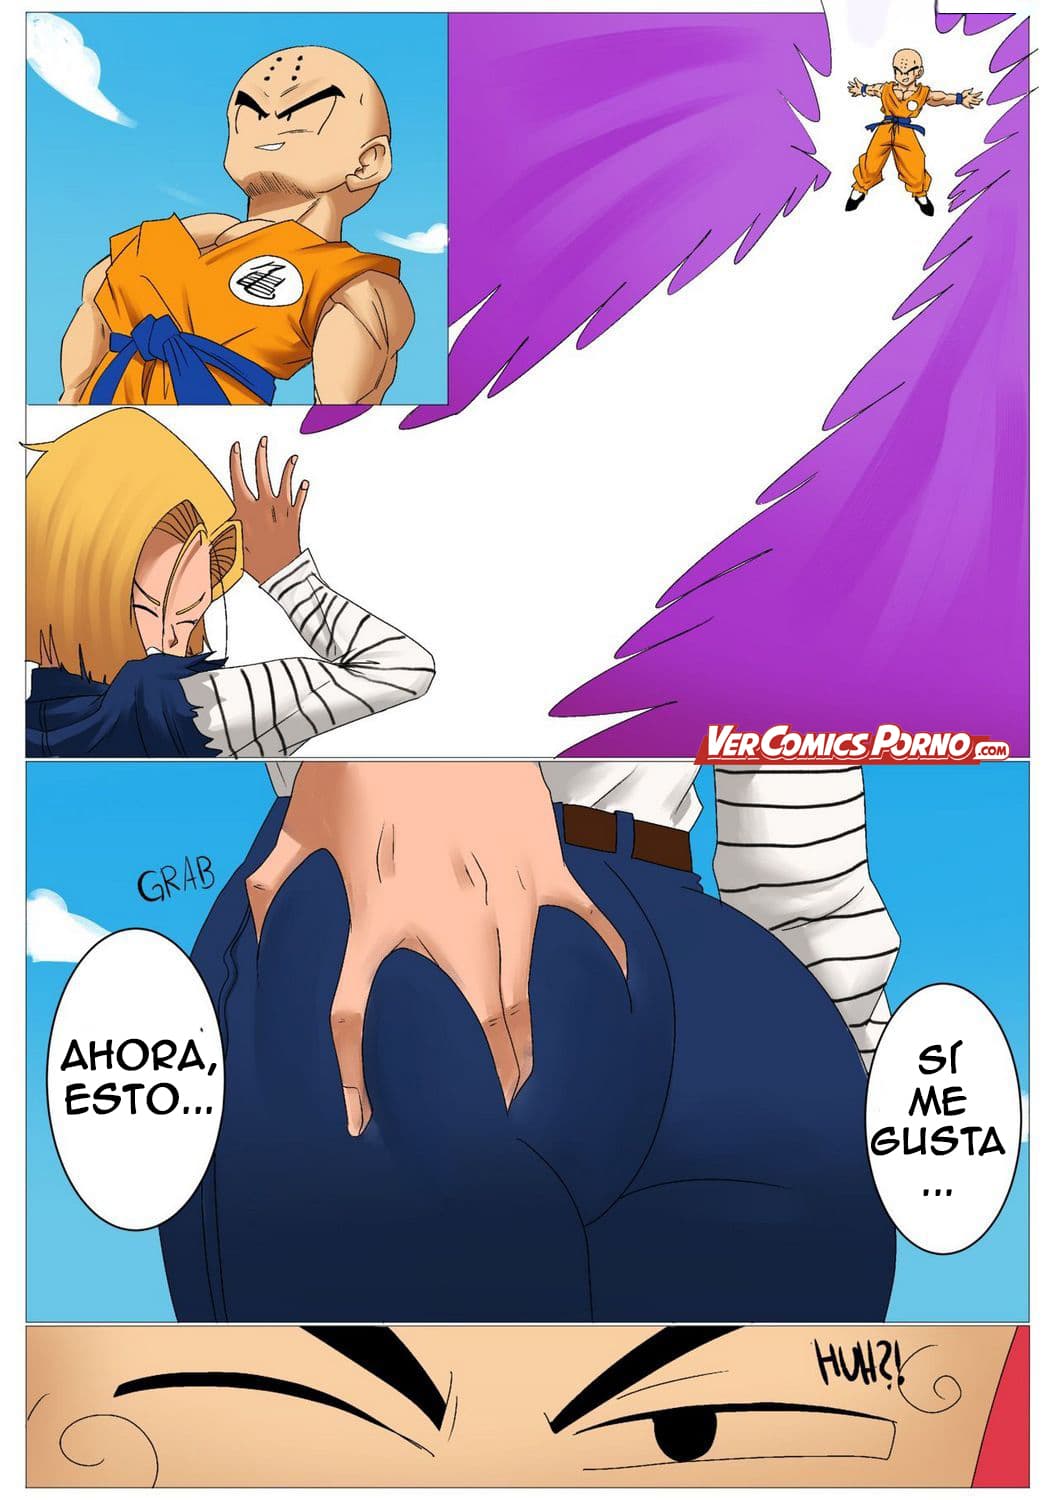 [Echo Saber] Android 18 Mini – Body Swapping With A Weakling (Traduccion Exclusiva) - 1